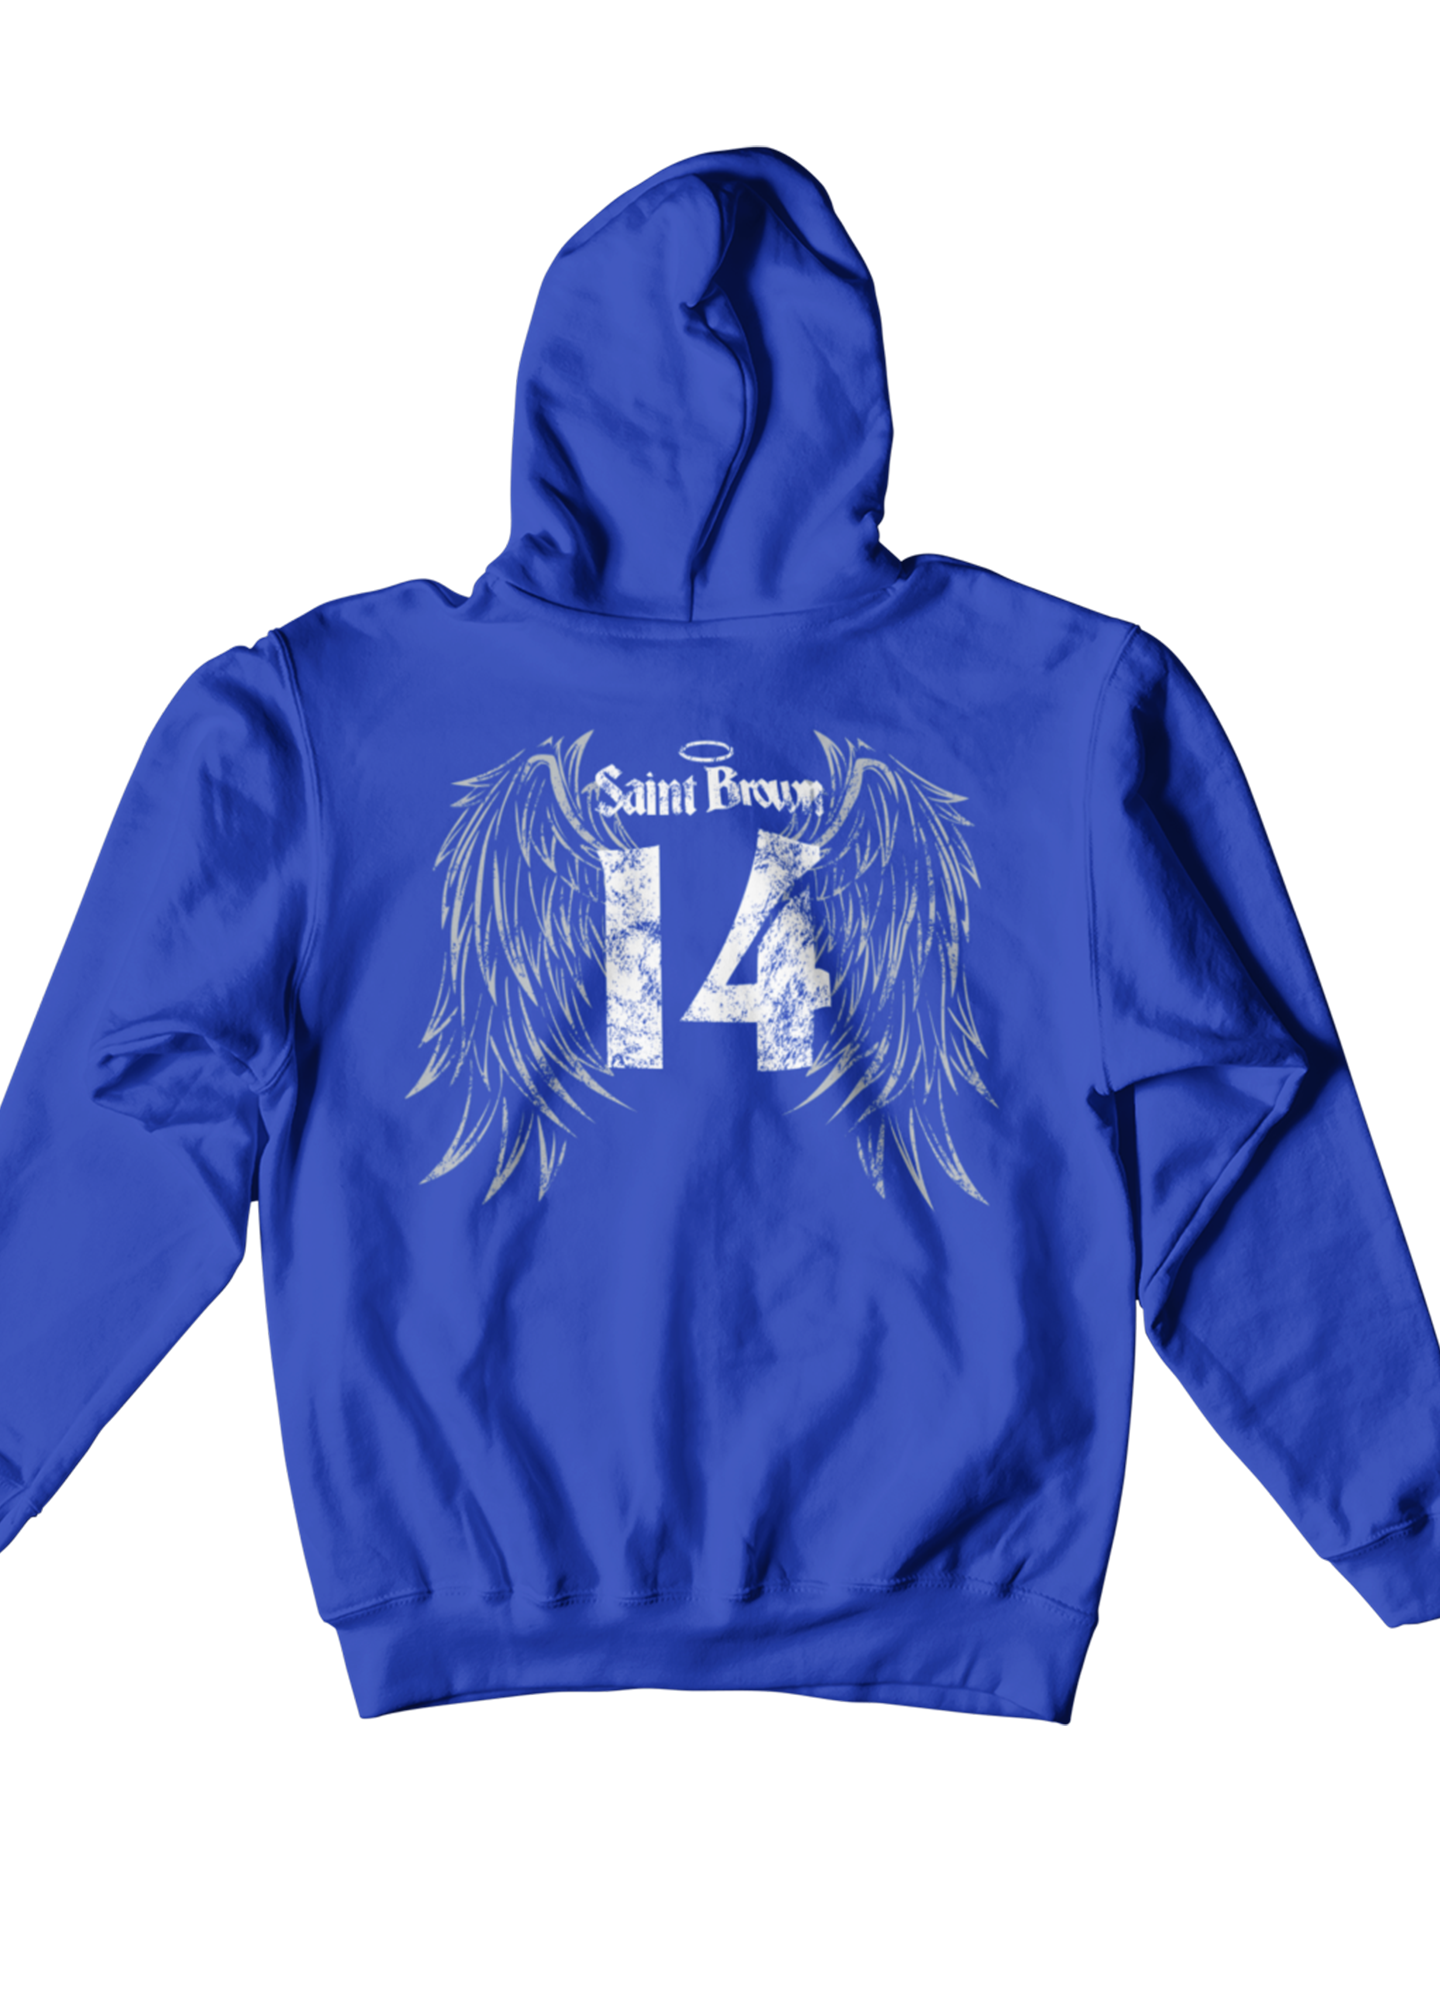 SAINT Brown Soft Mid-weight Hoodie - LIMITED EDITION